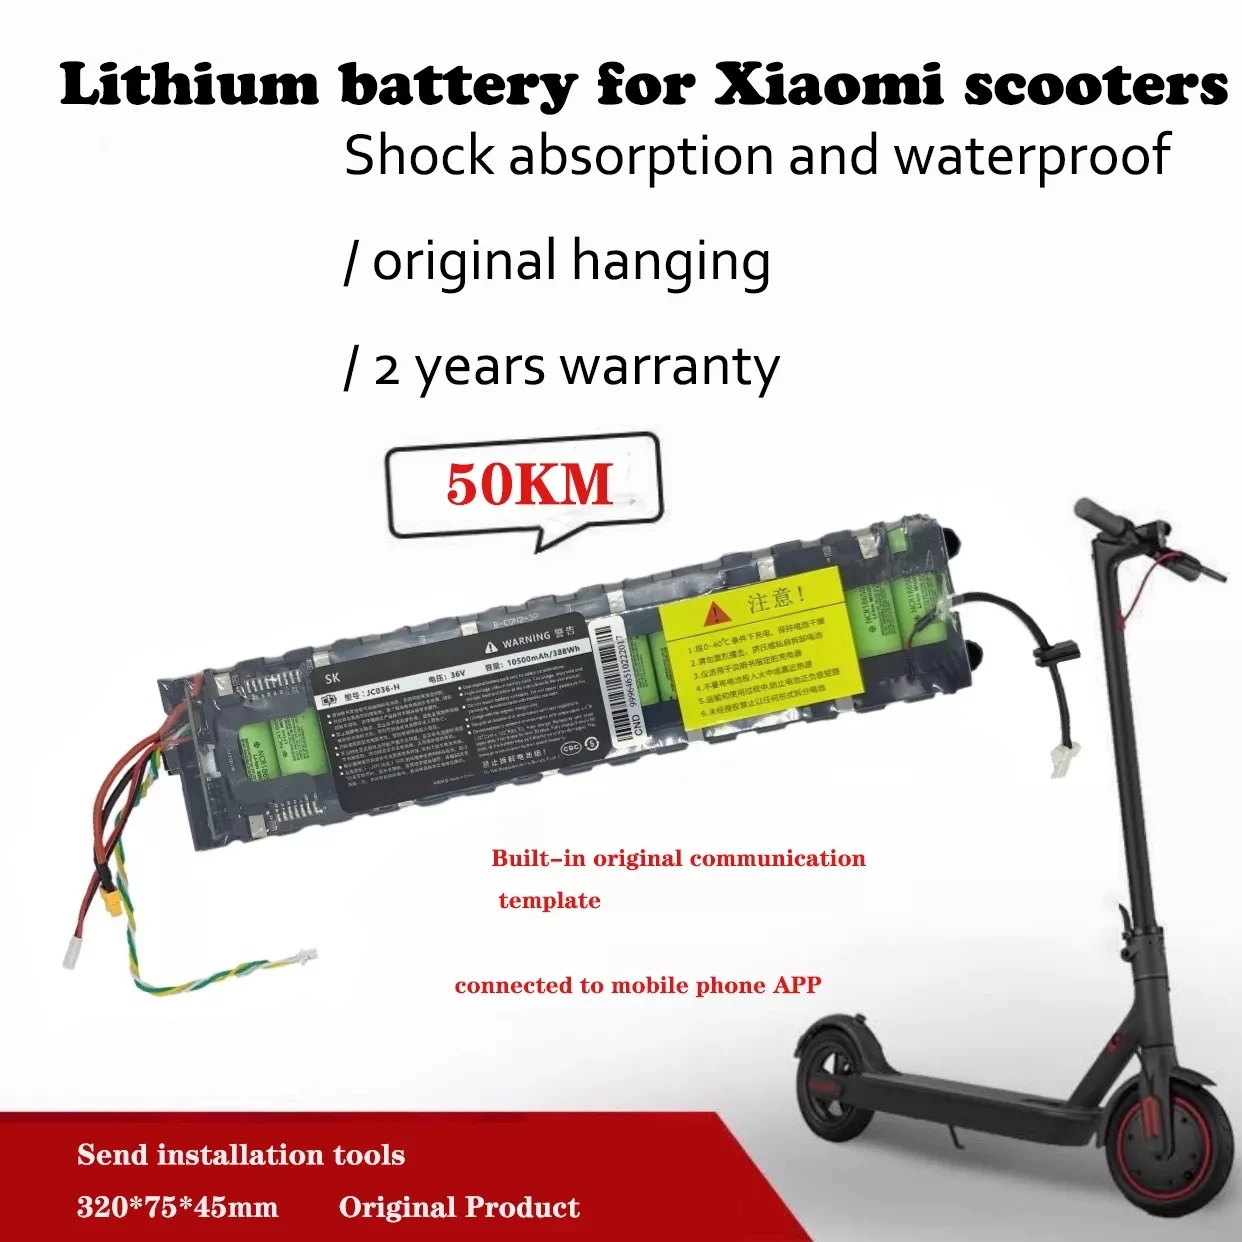 

36V 7.8ah/10.5ah 10S3P 18650 Battery Pack with APP for Xiaomi M365 Ninebot Segway Scooter Ebike Bicycle Inside with 20A BMS